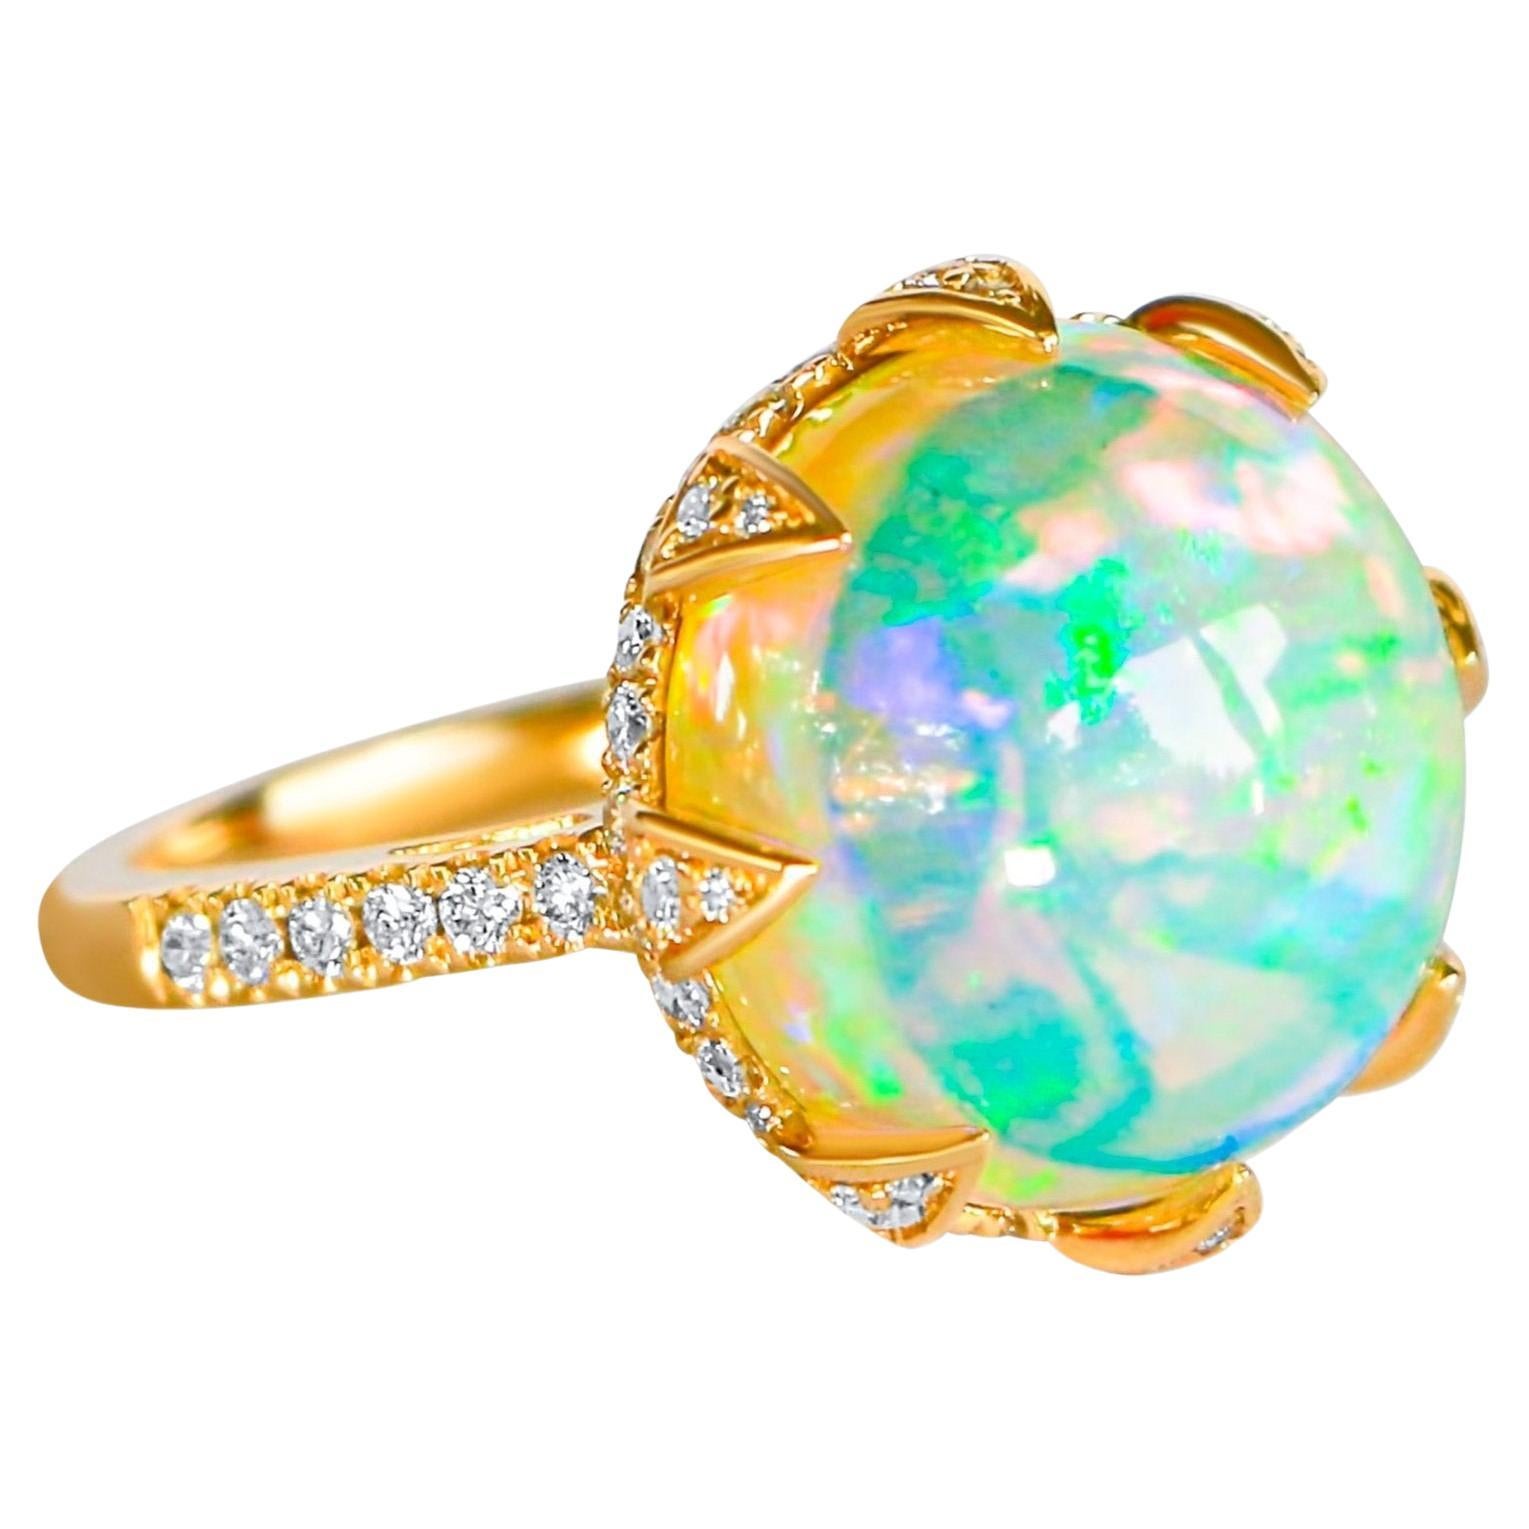 Mega Round Opal and Diamond Lotus Ring - Noteworthy Large Opal - 10 ct For Sale